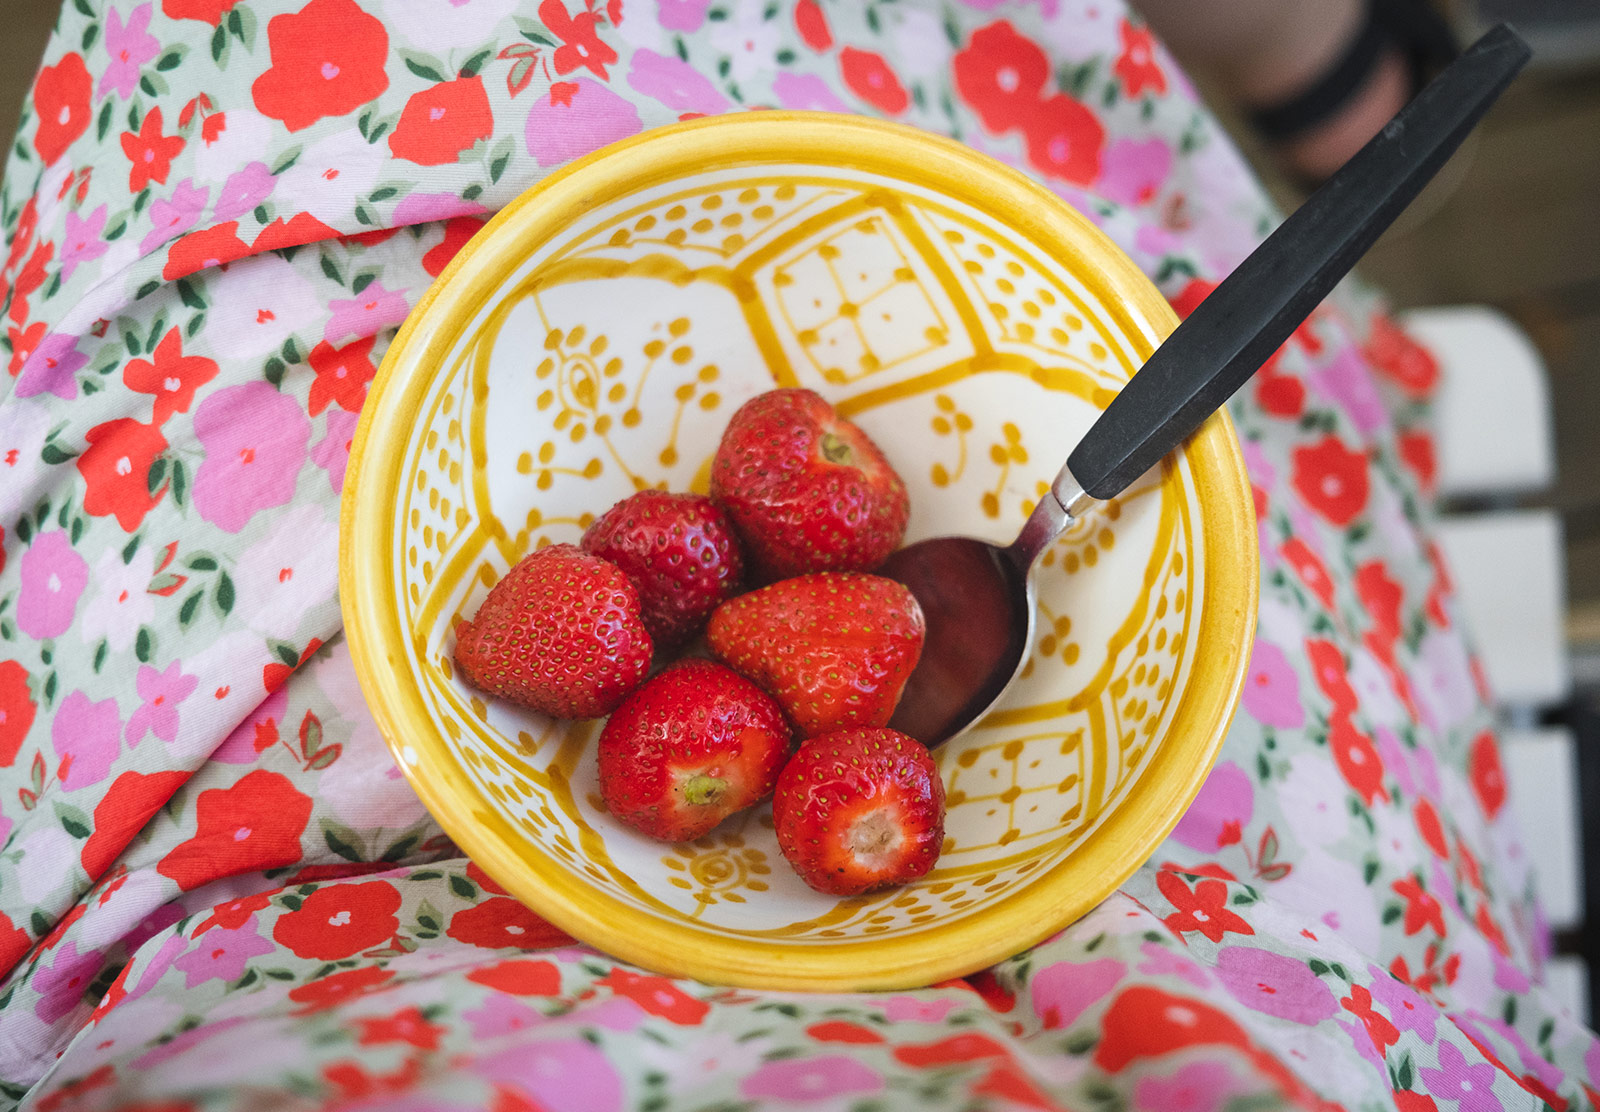 Strawberries in small bowl